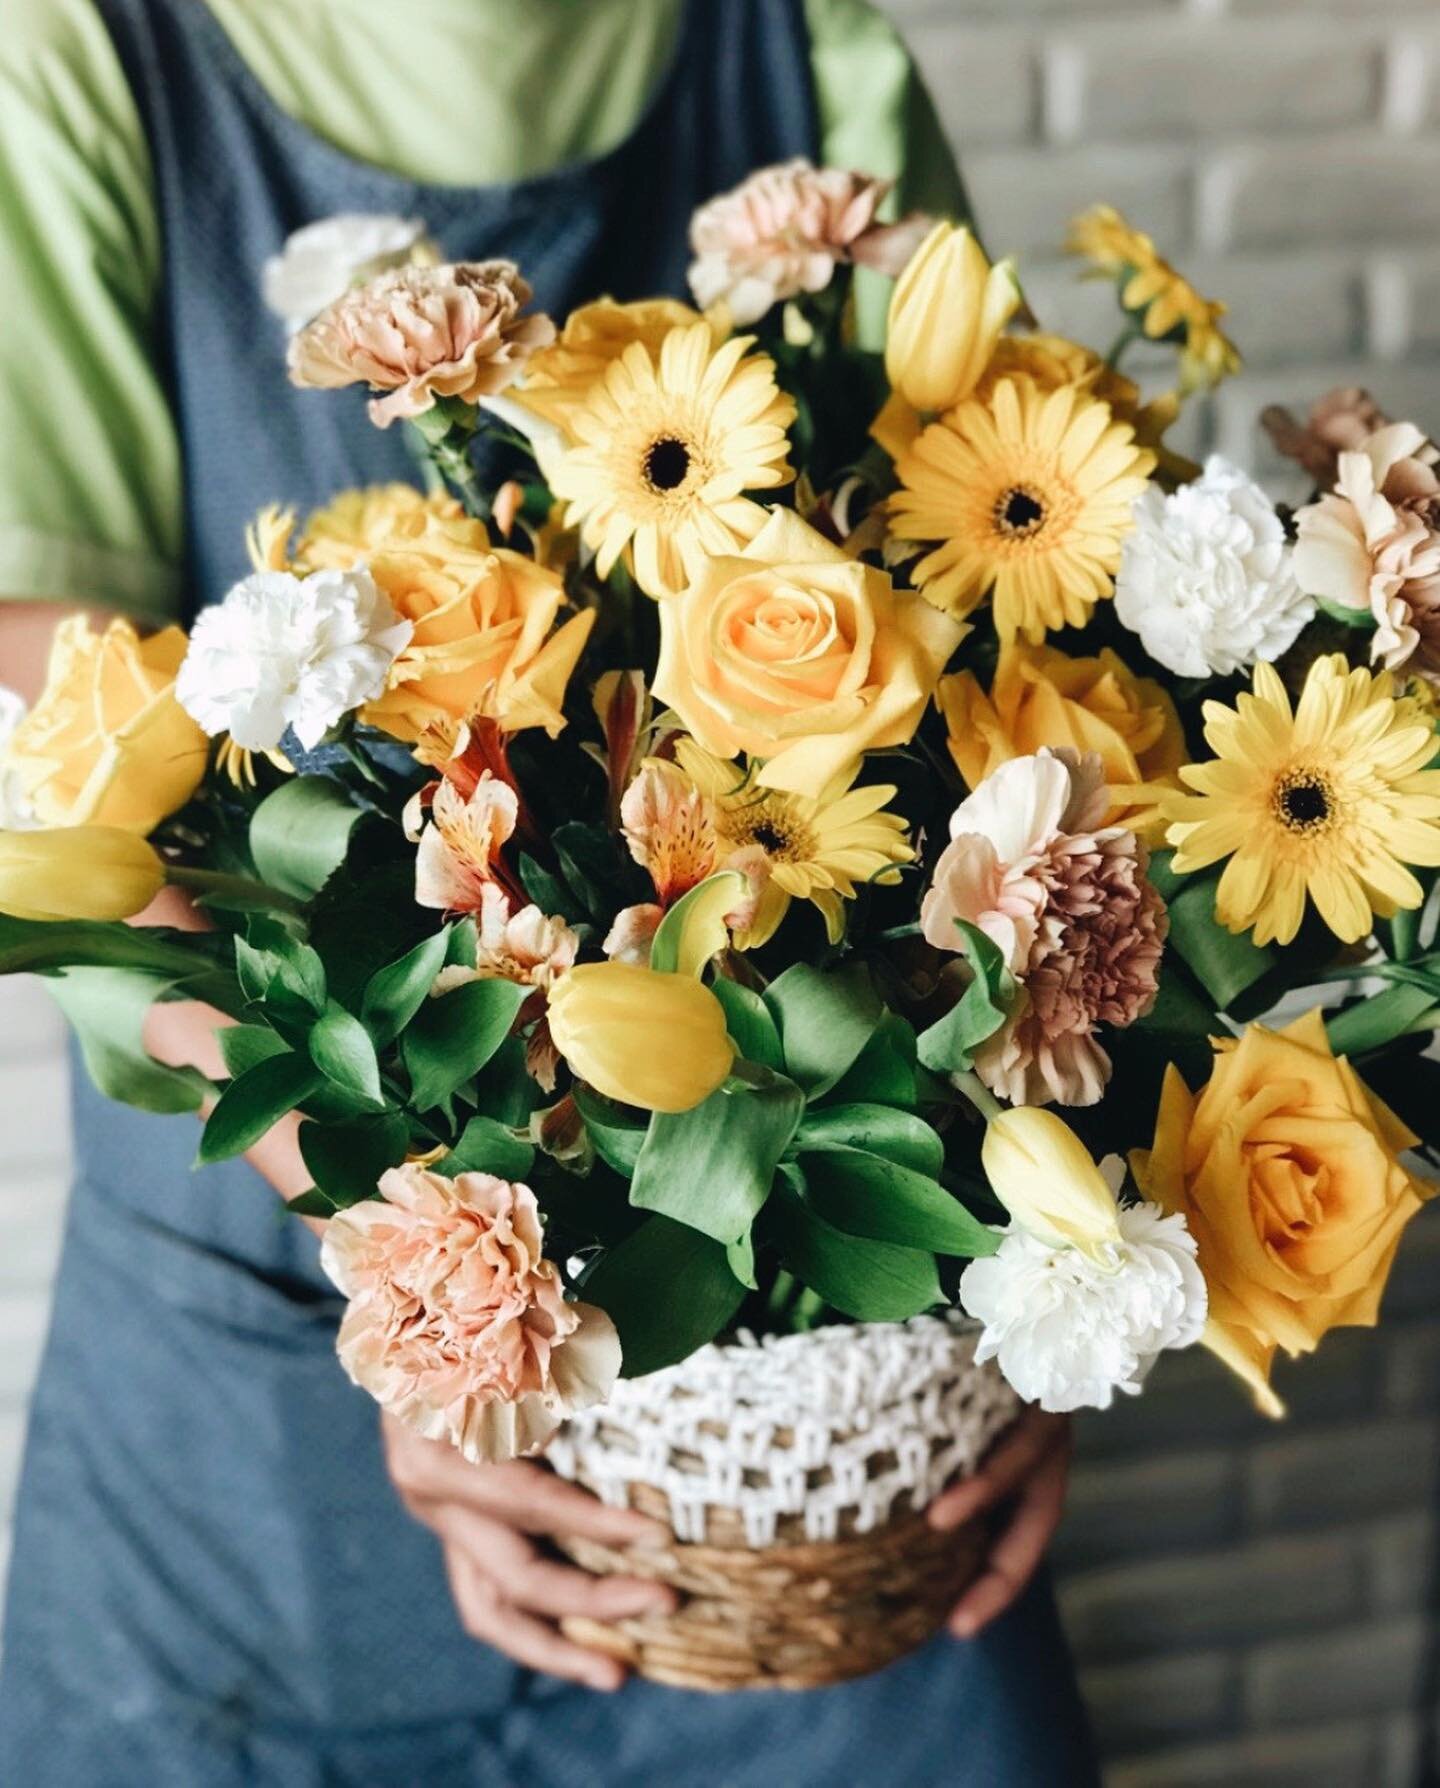 Hello Yellow 💐💛🌼🔆
The Van Gogh Blooms paired with vegan chocolate pralines from @sobas_sweets 
. . . 
www.thebaliflorist.com
. . . 
Less wrapping | no single-use vessels | #sustainablefloristry
. . . 
Inquiries on orders/workshops
WA: (+62) 811 3